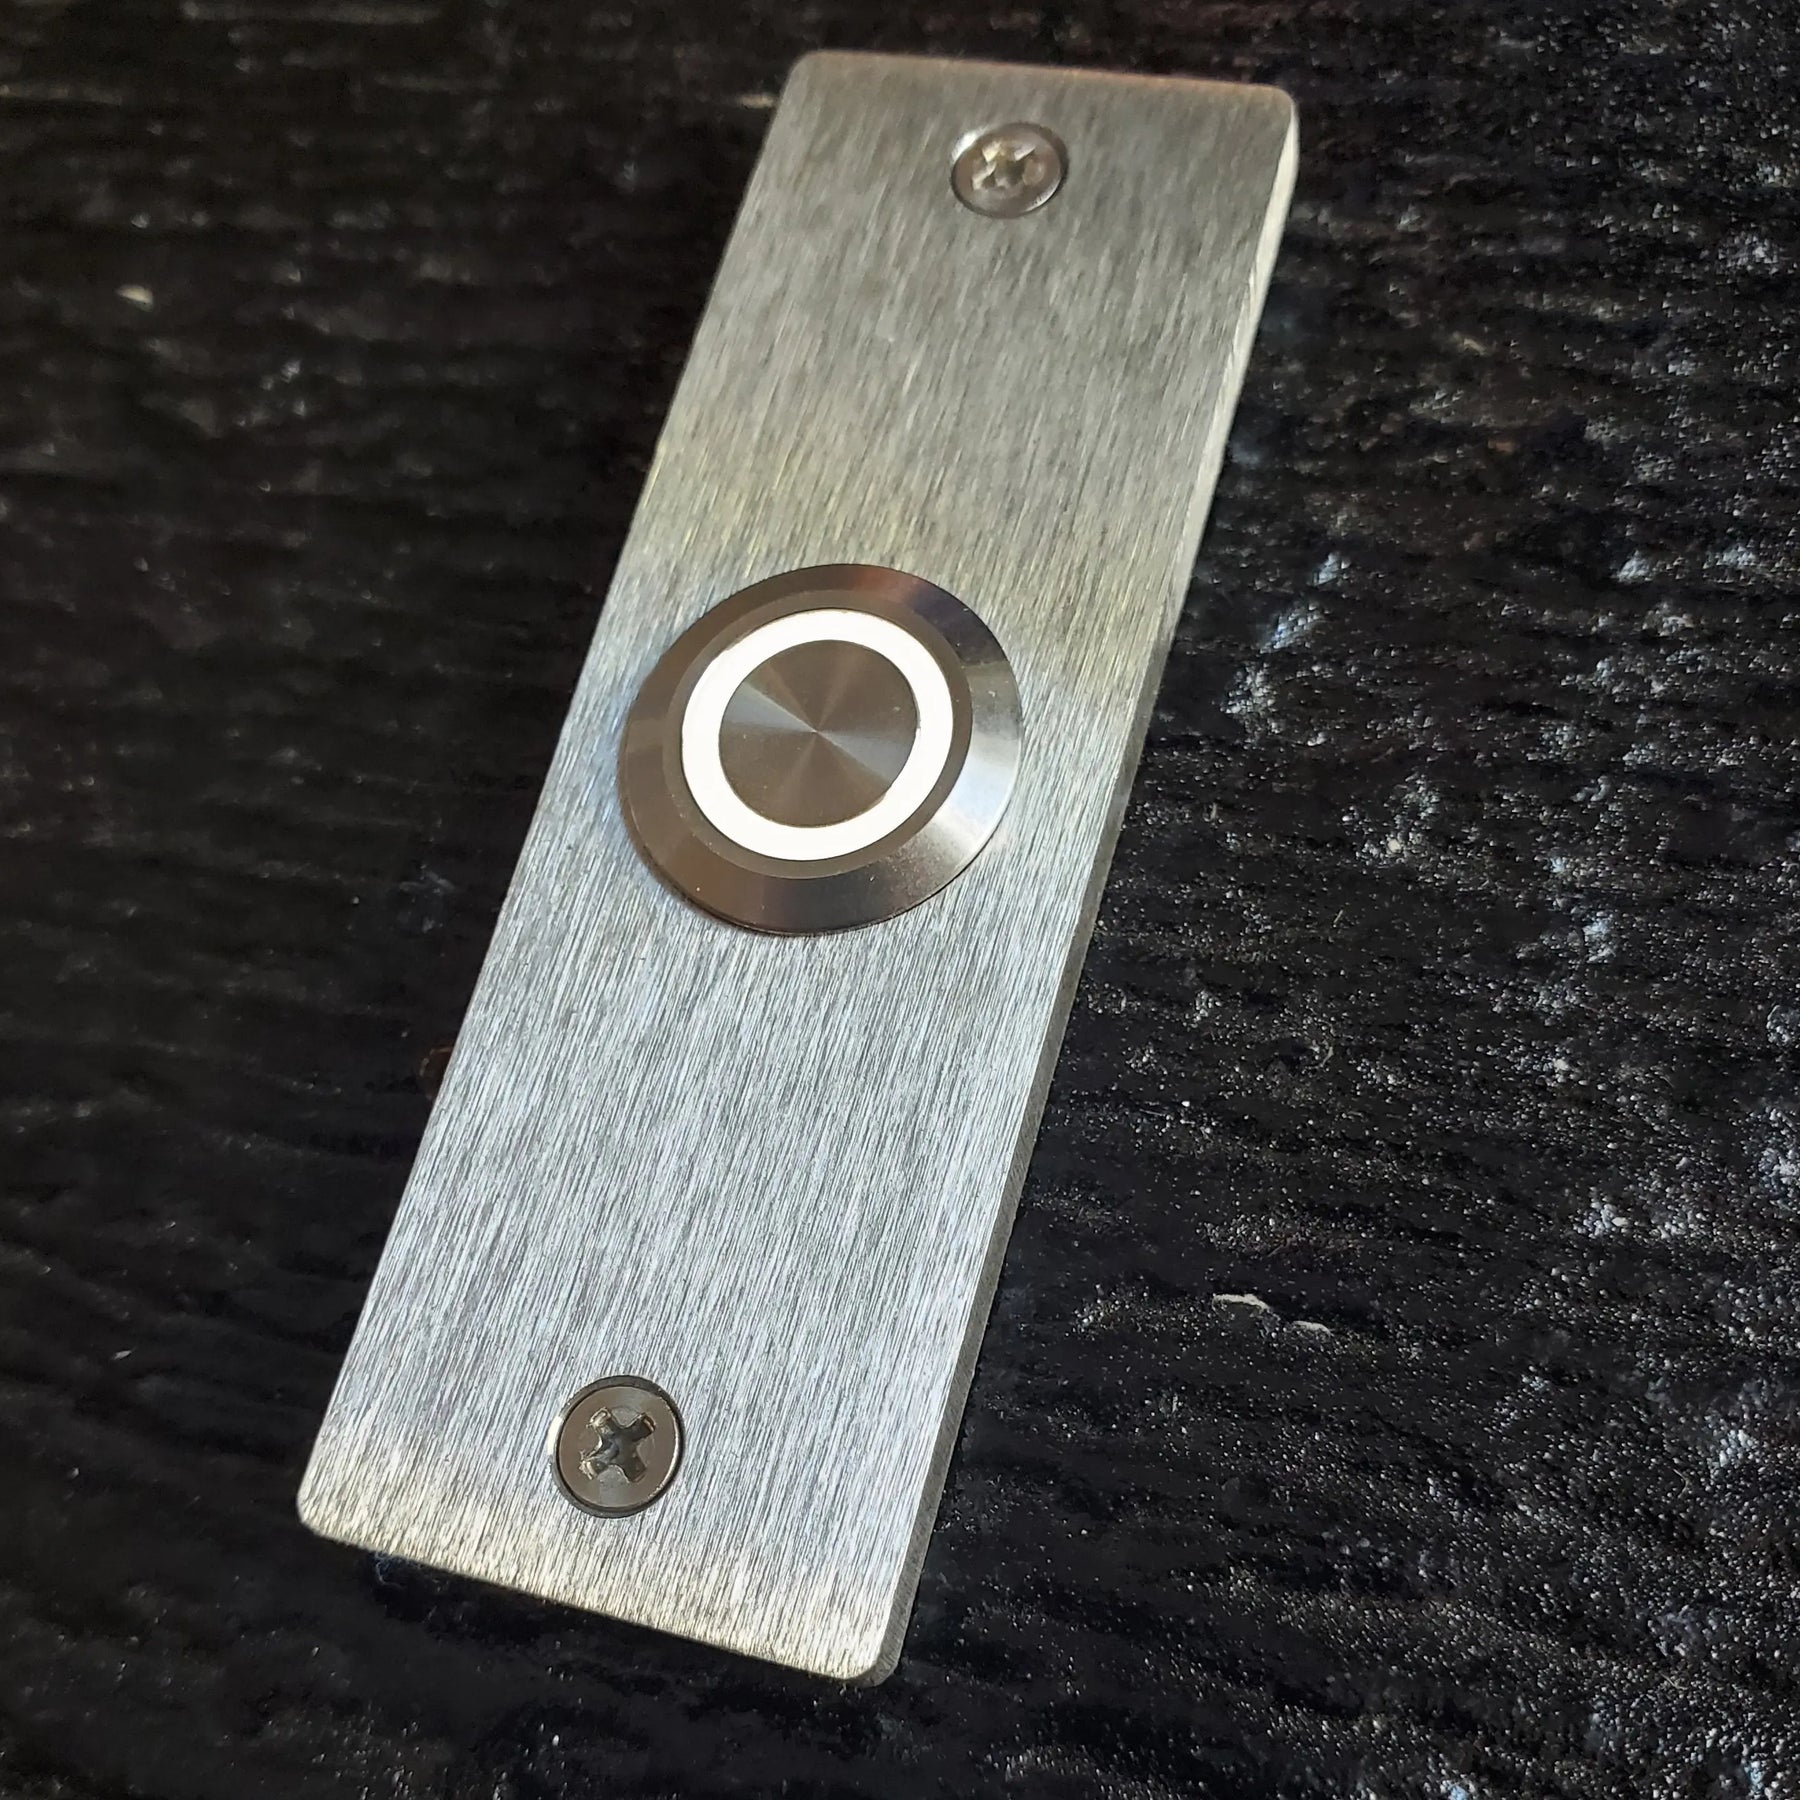 Stainless Steel Narrow Doorbell Expressions LTD